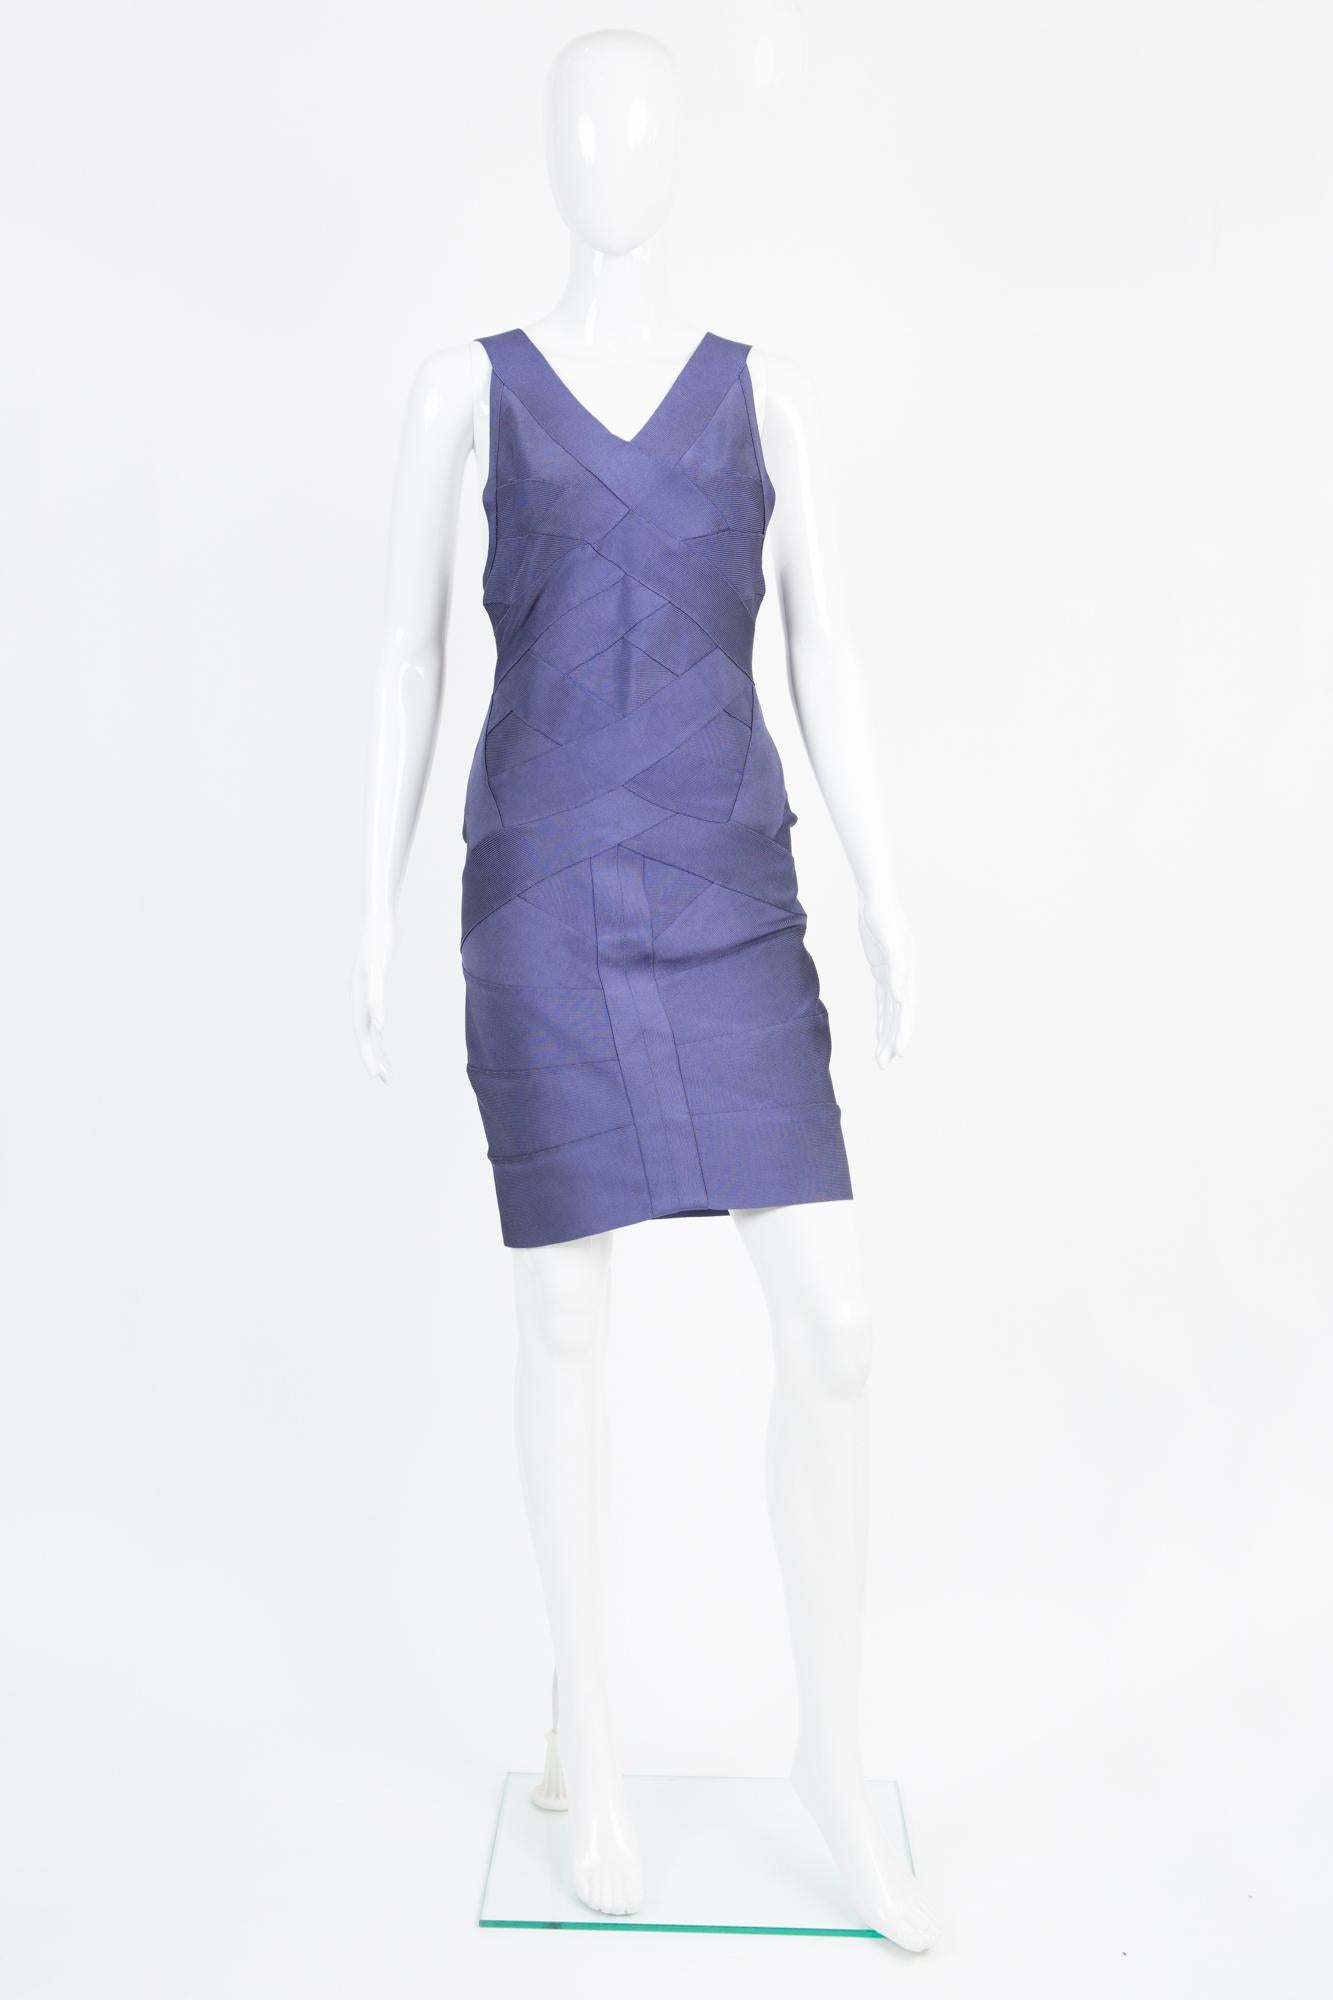 1990s Herve Leger purple knitted bandage dress featuring a short length, pleats on the body, front bands yokes details, a center back zip on a brown band. 
Composition :90% rayon, 9% nylon, 1% lycra
Size labe:l L
Unworn, with tag attached In